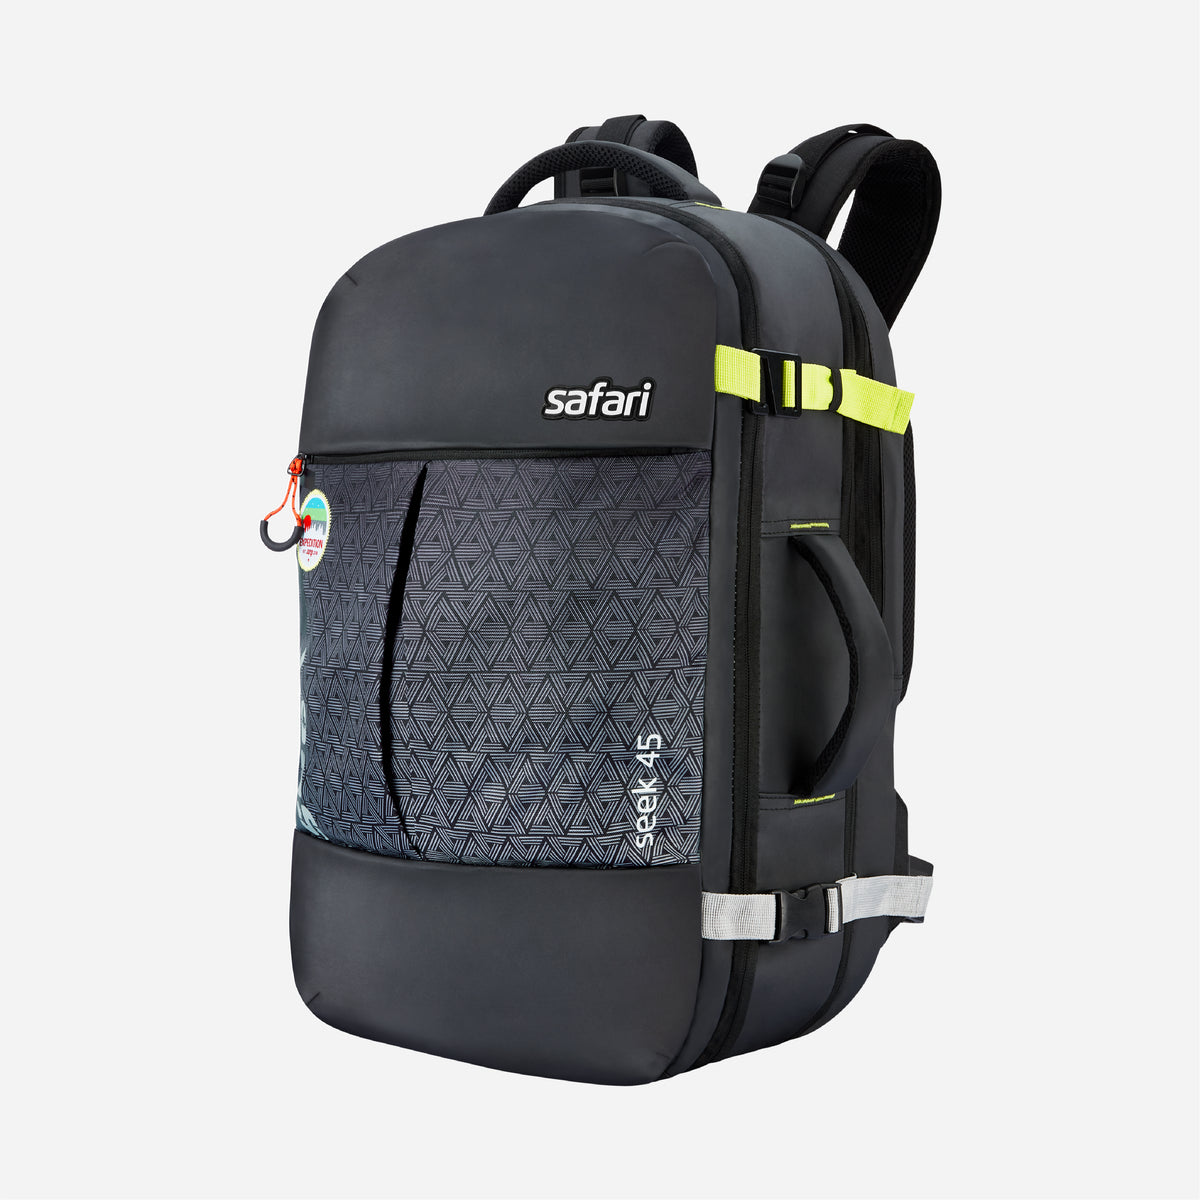 Safari Seek 45L Overnighter Black Travel Backpack with Two Way Handle, Chest Straps & Back Padding.